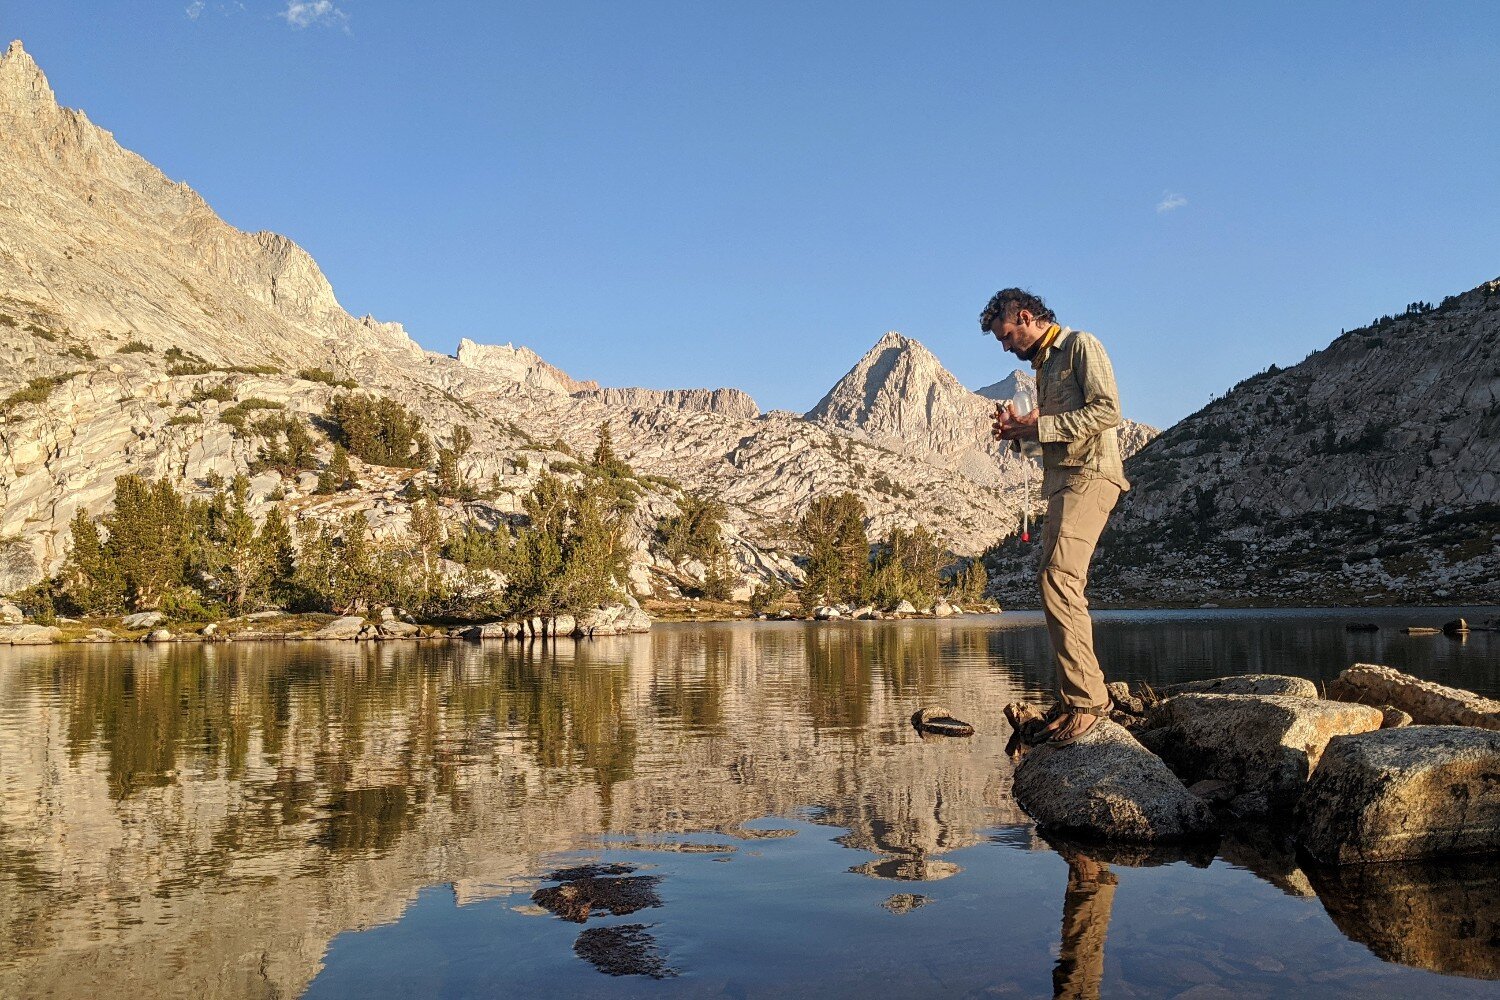 The Prana Stretch Zion Pants are durable enough for thru-hikes like the John Muir Trail in the Sierras.